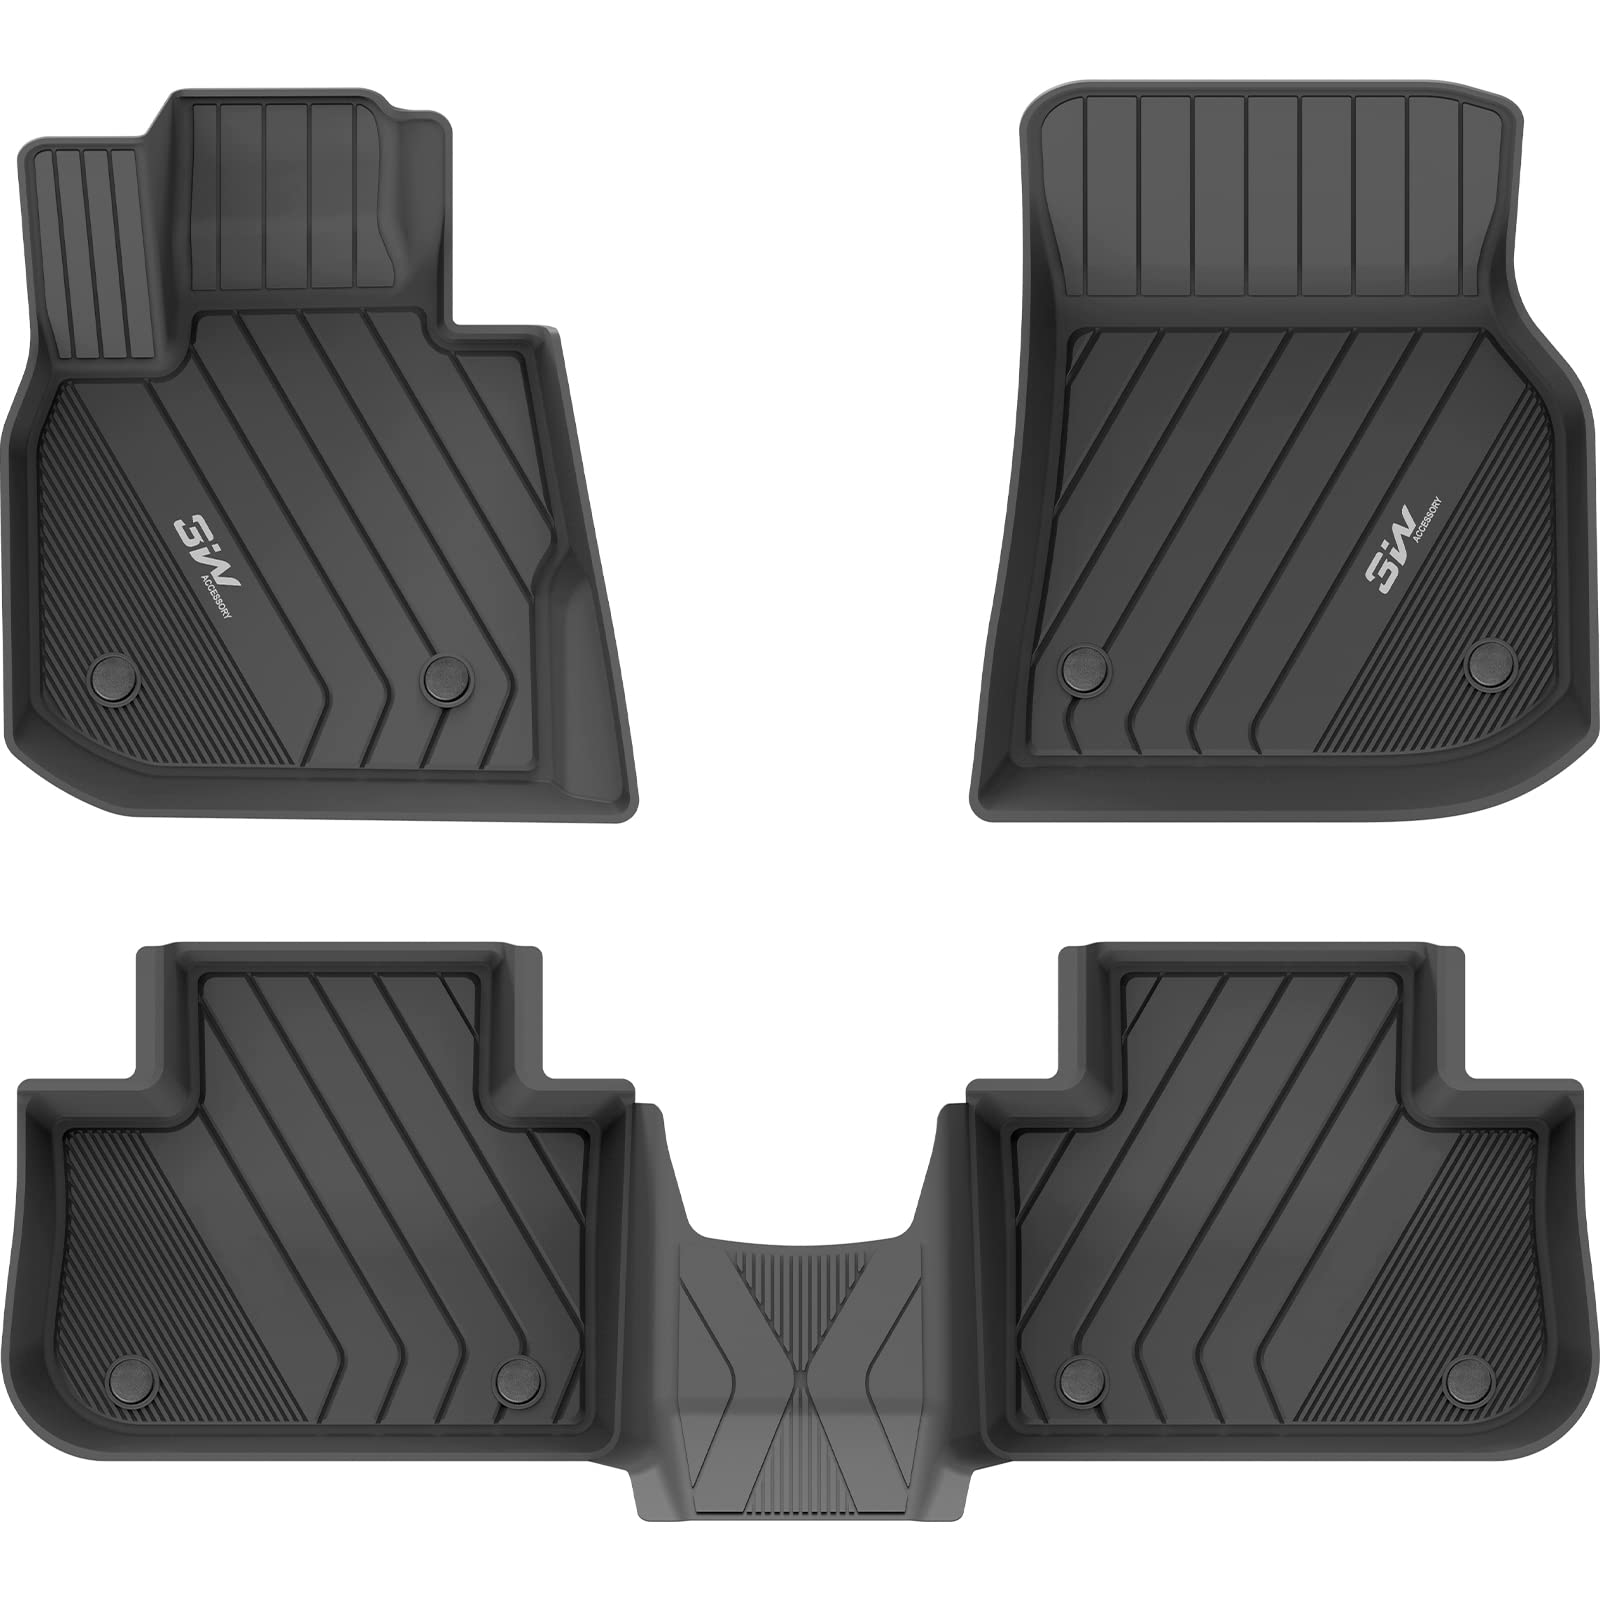 3W BMW 2019-2024 X4 M M40i xDrive30i Floor Mats & Cargo Mats TPE Material & All-Weather Protection Vehicles & Parts 3Wliners 2019-2024 X4 2019-2024 1st&2nd Row Mats